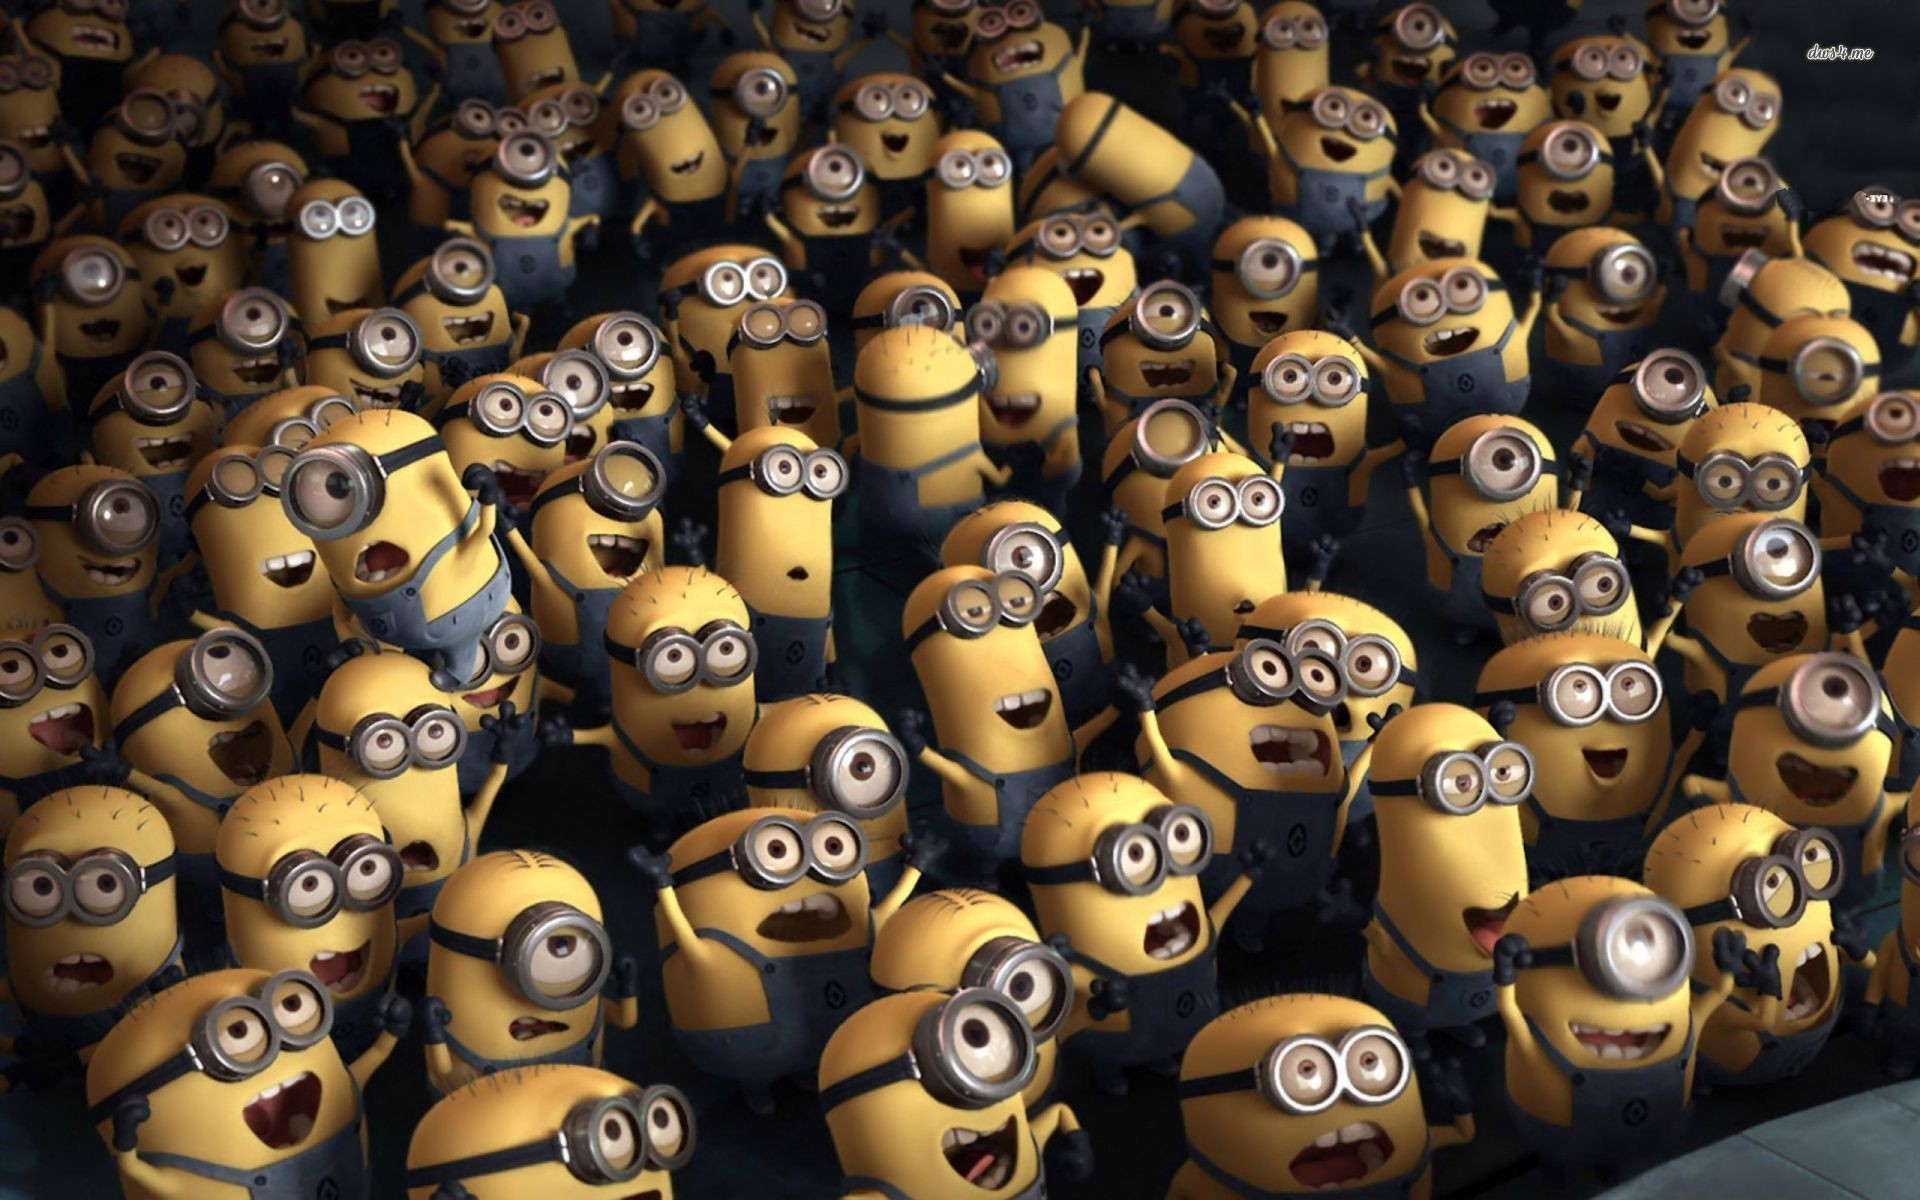 1920x1200 Crowd of Minions - Despicable me 2